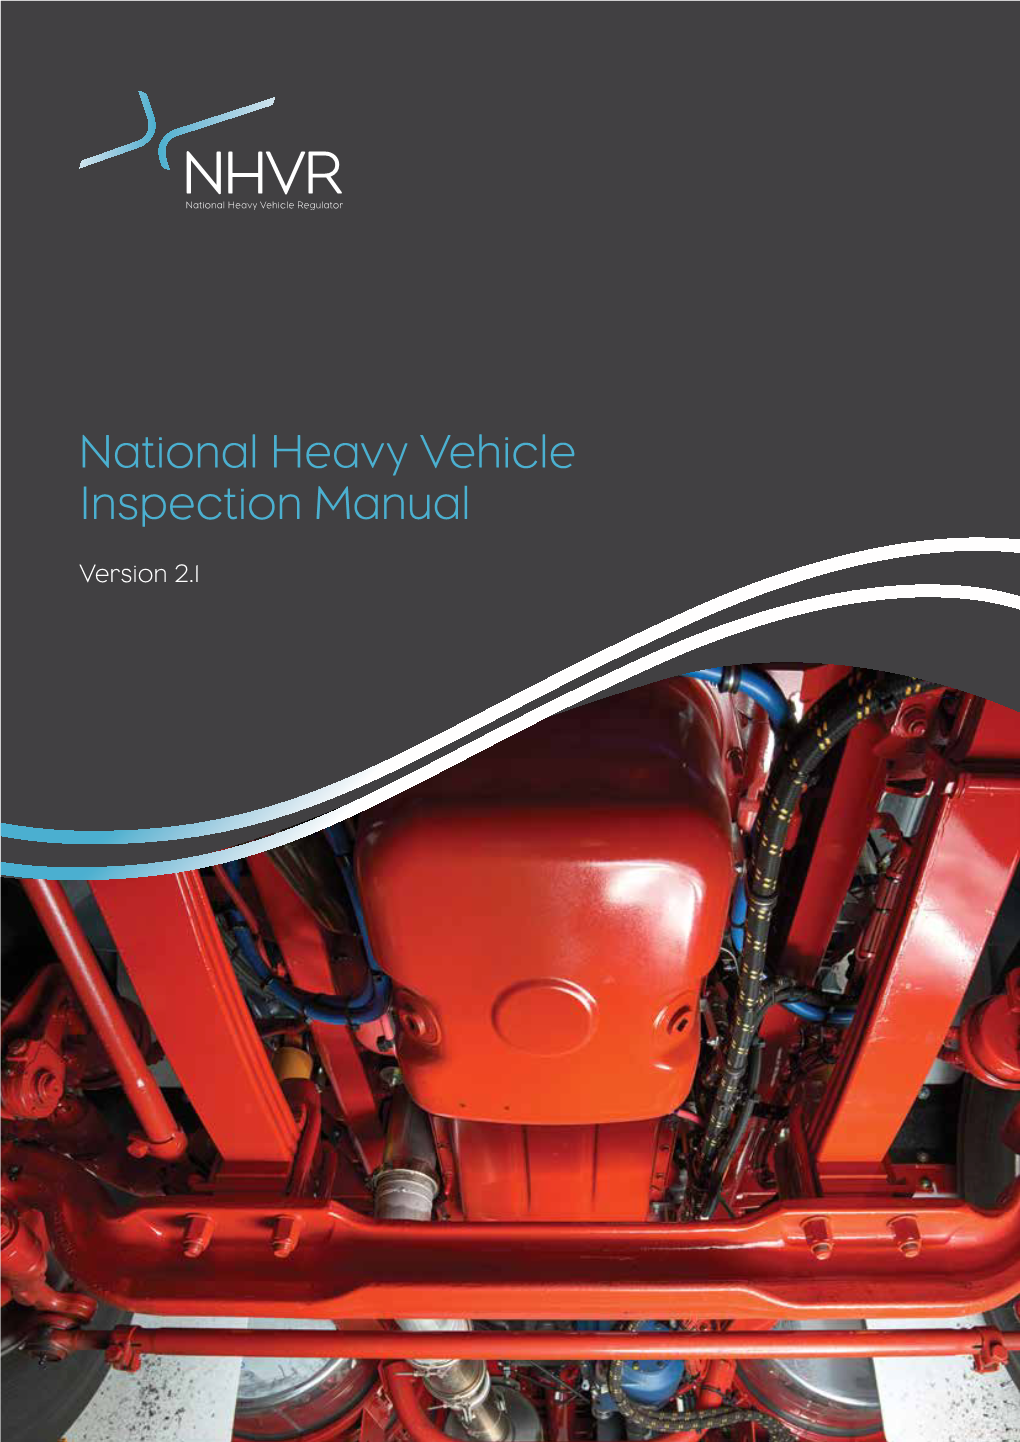 National Heavy Vehicle Inspection Manual